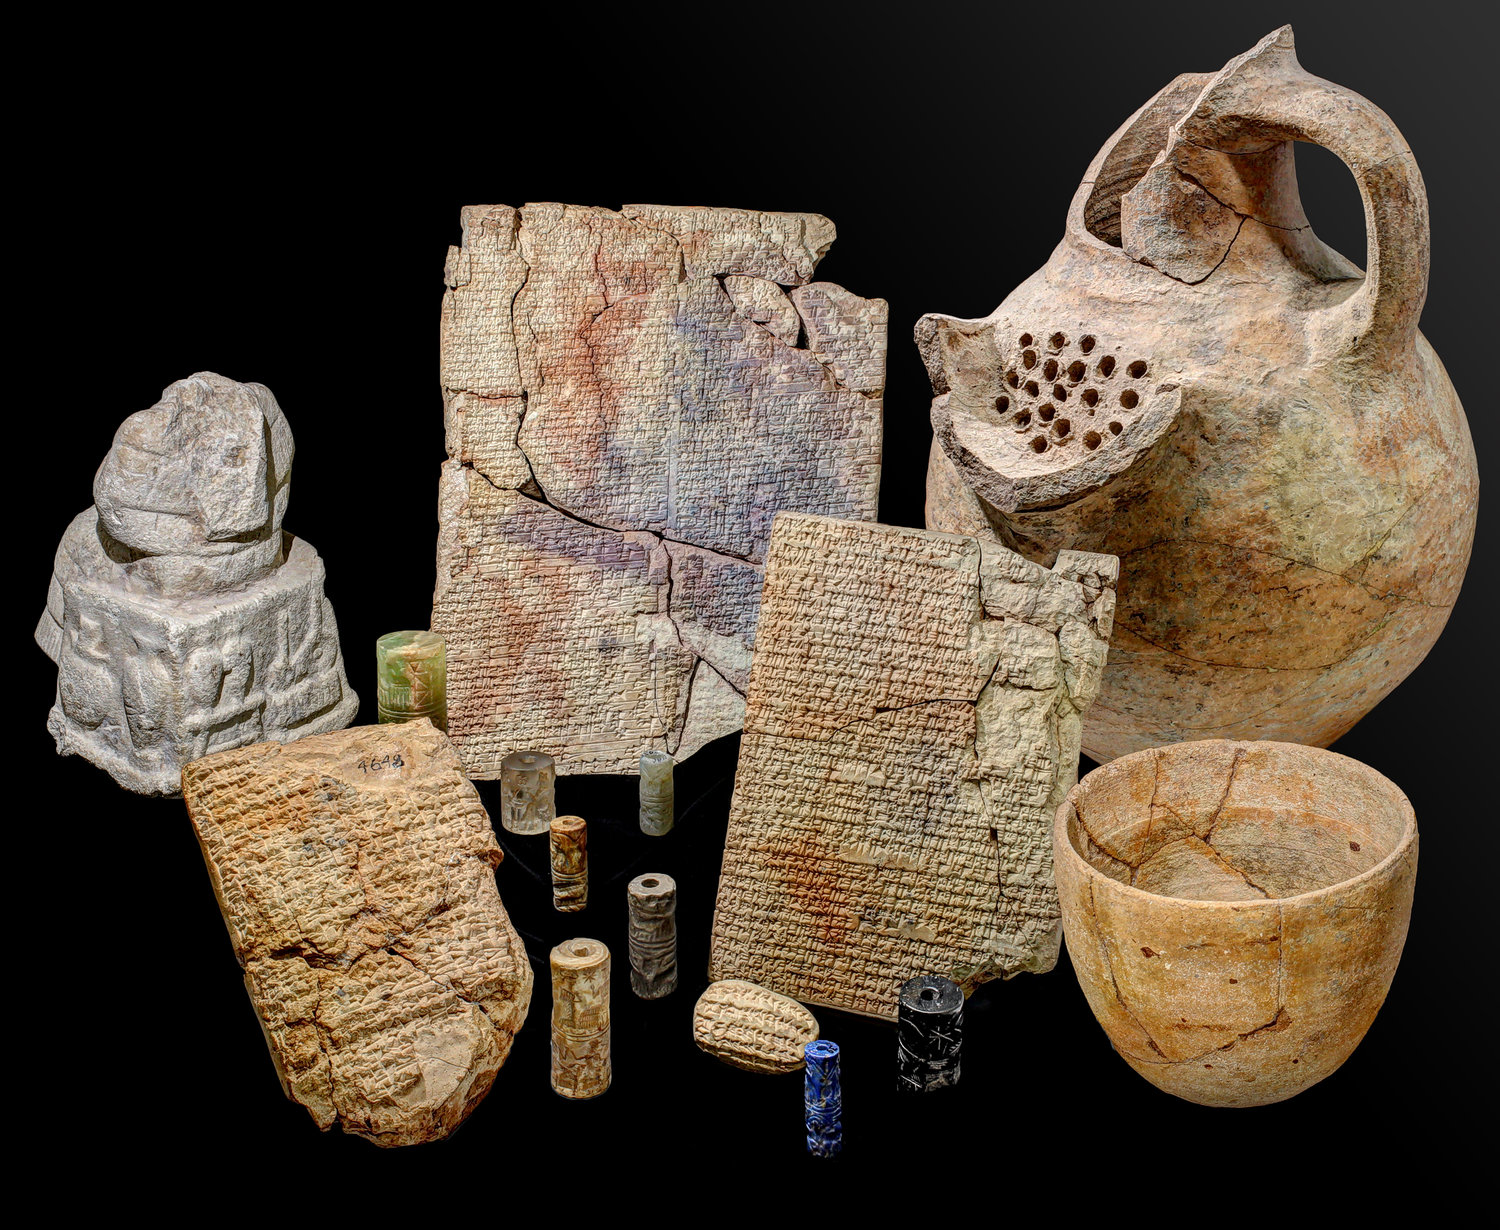 4,000-Year-Old Recipes? Yum!